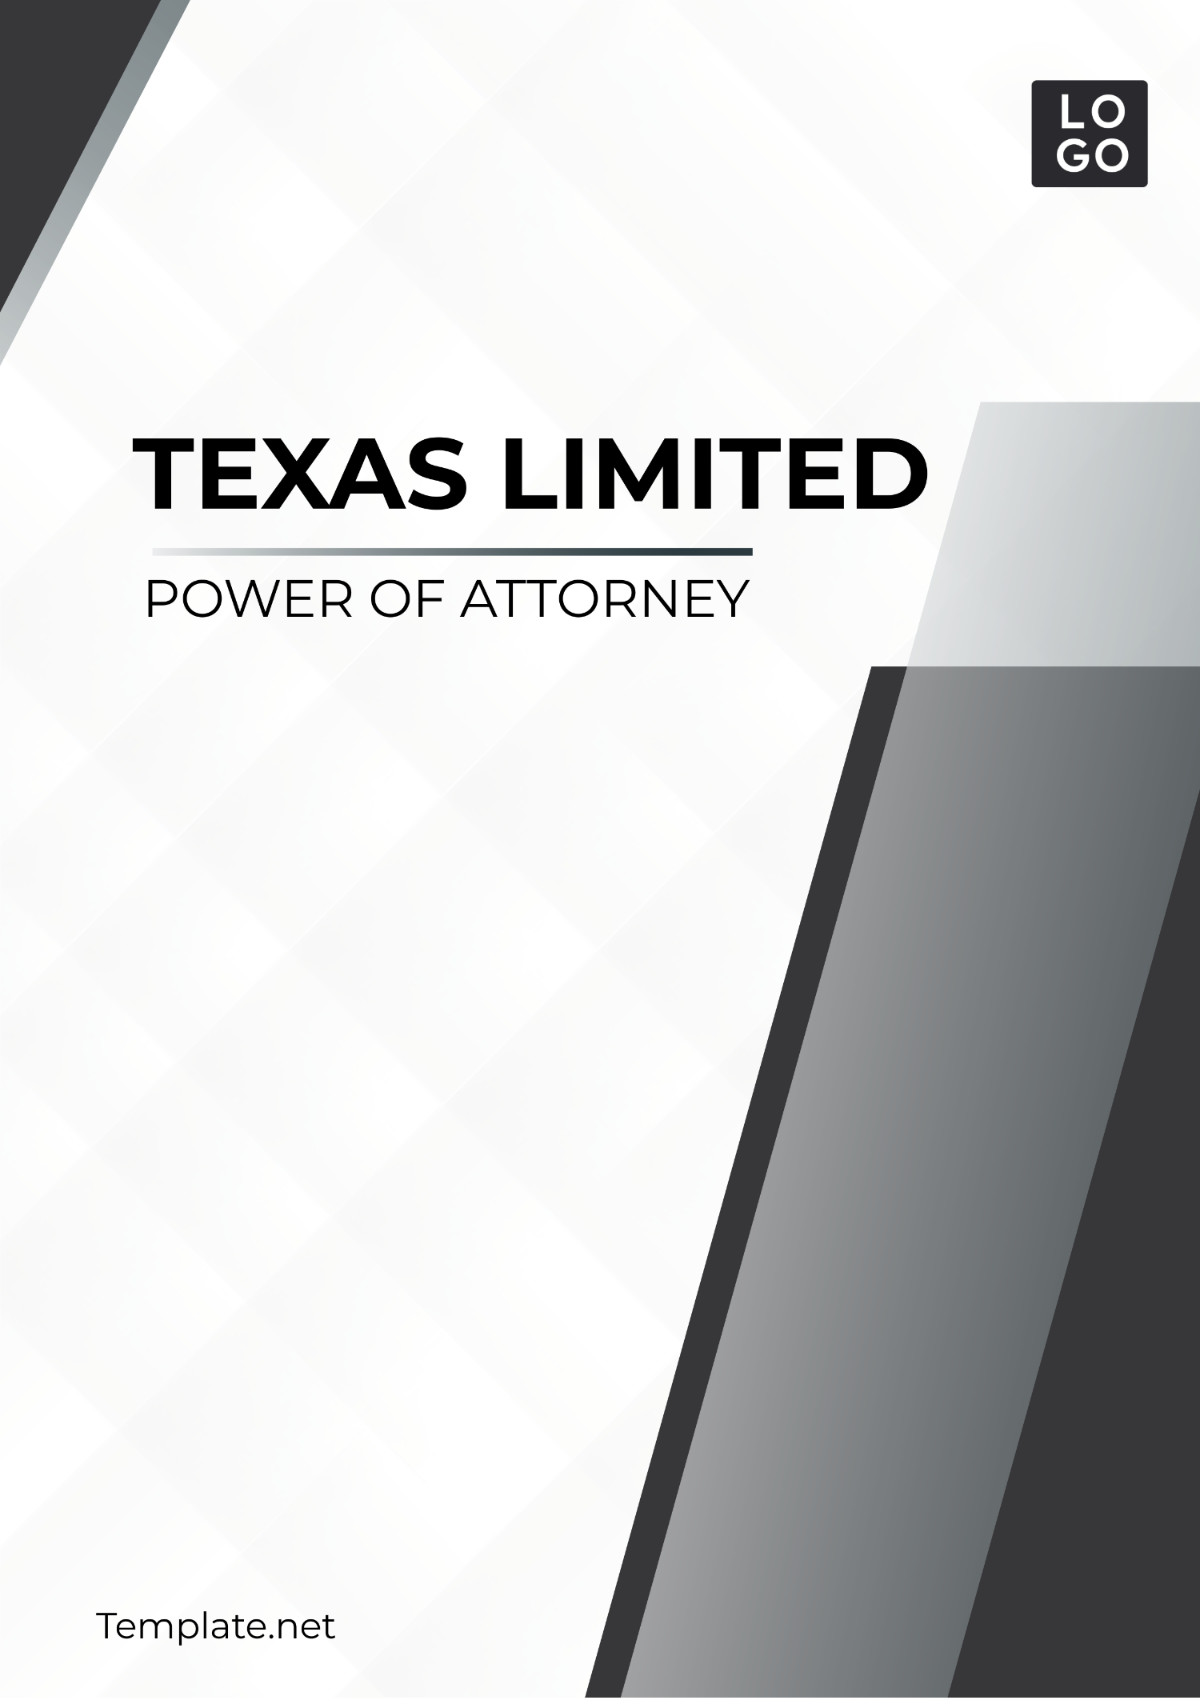 Texas Limited Power of Attorney Template